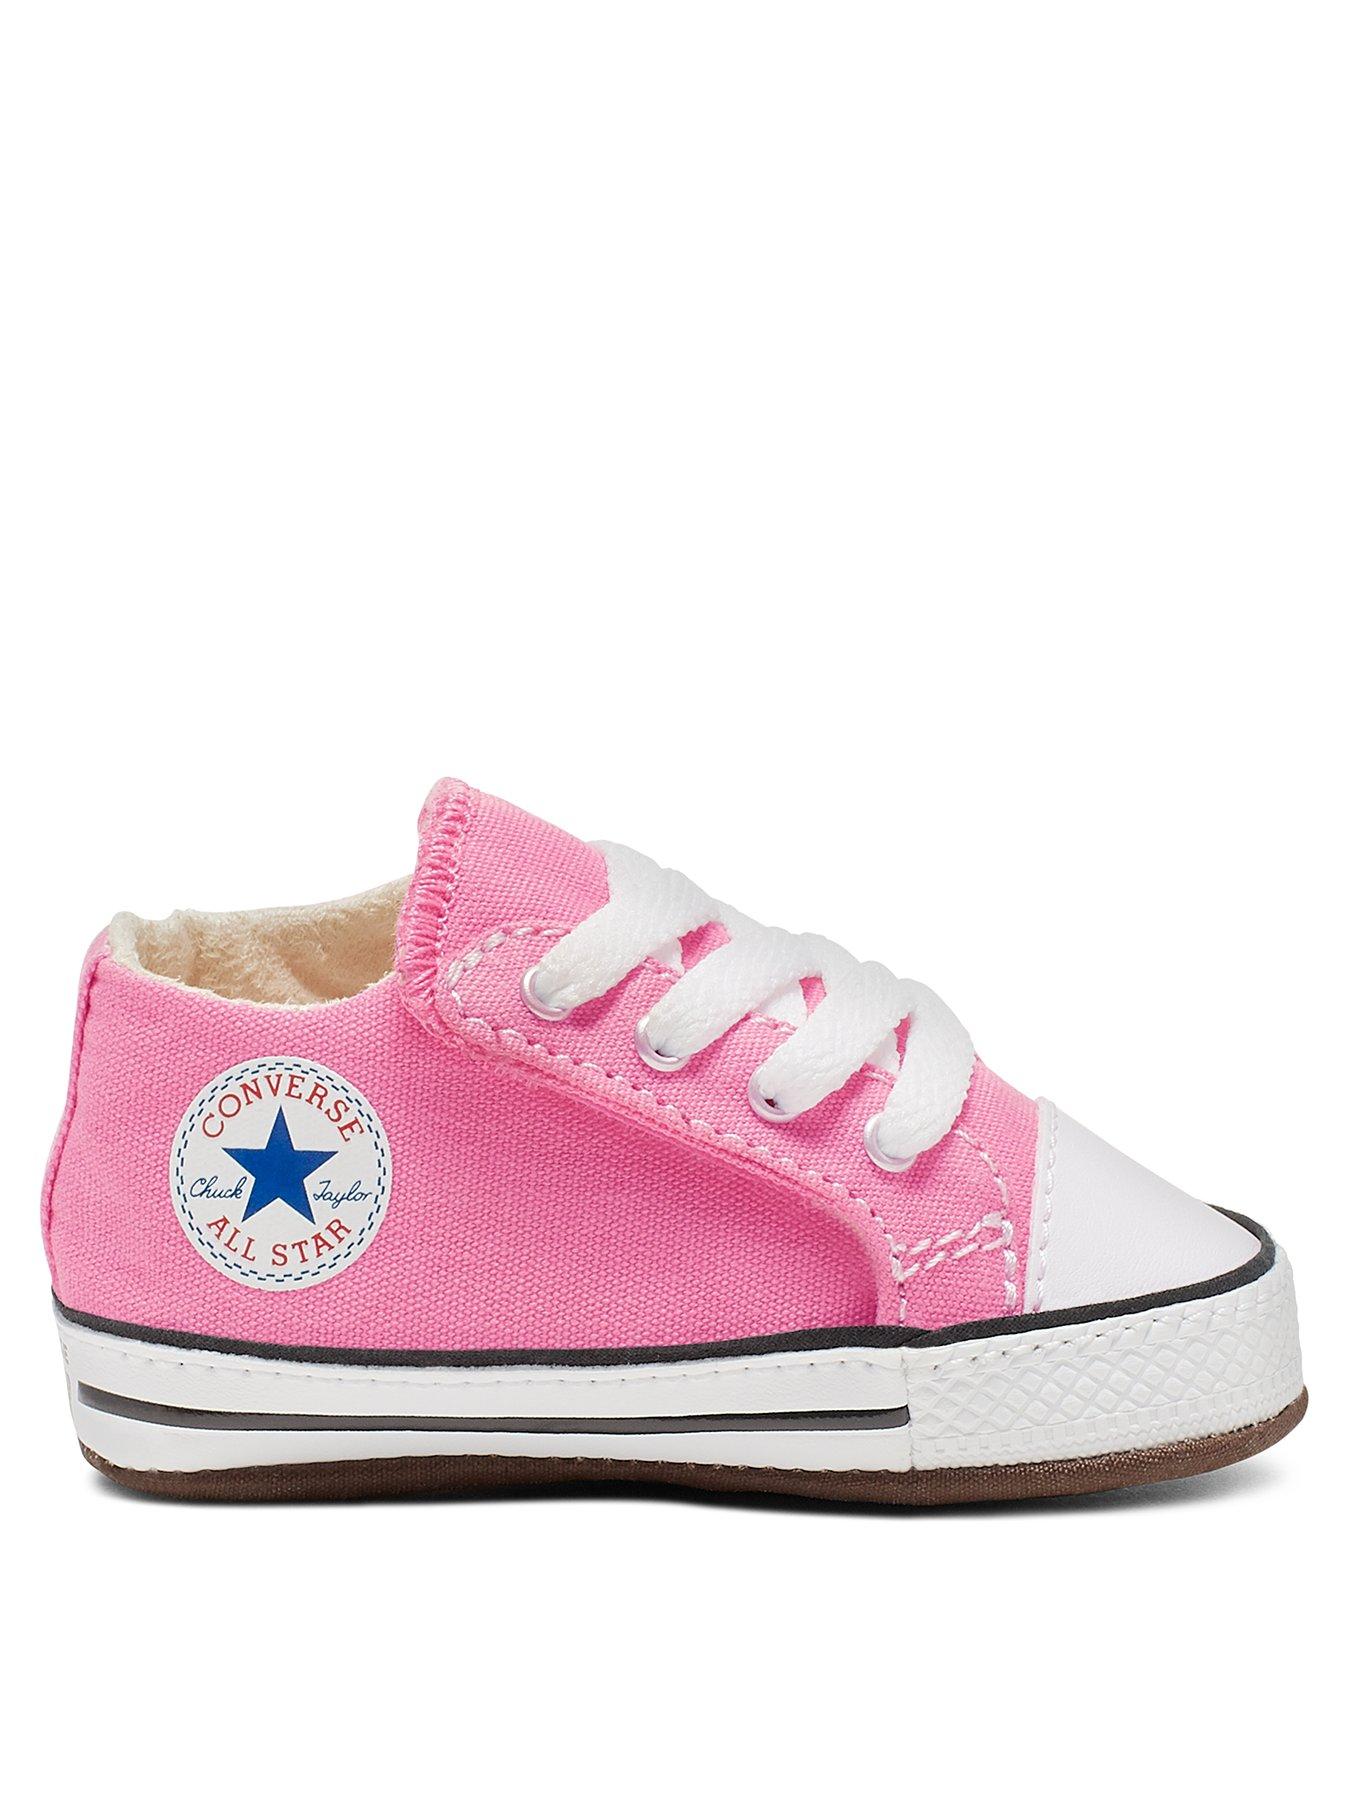 pink baby converse shoes